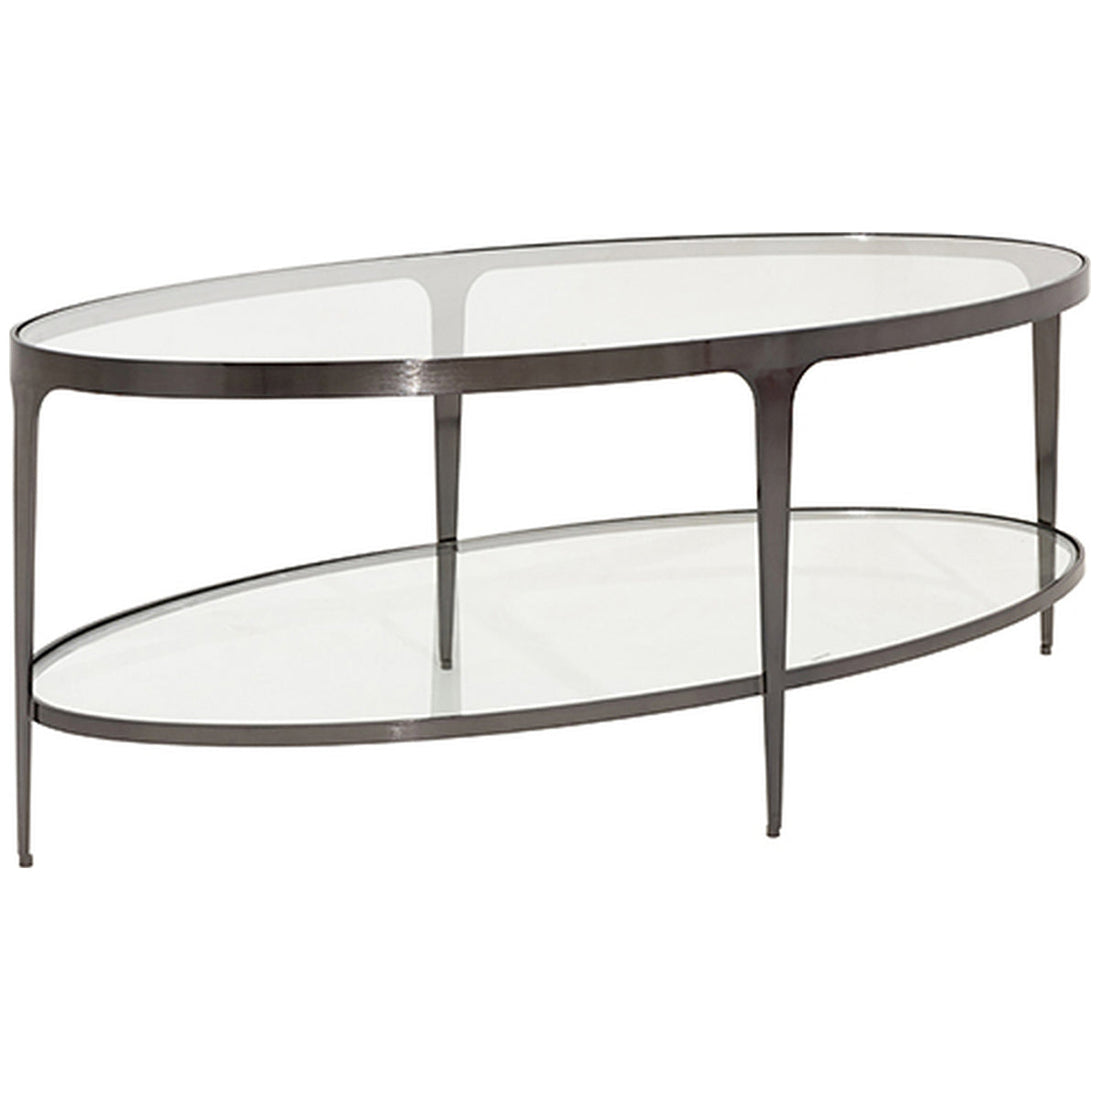 Worlds Away 2-Tier Glass Top Oval Coffee Table